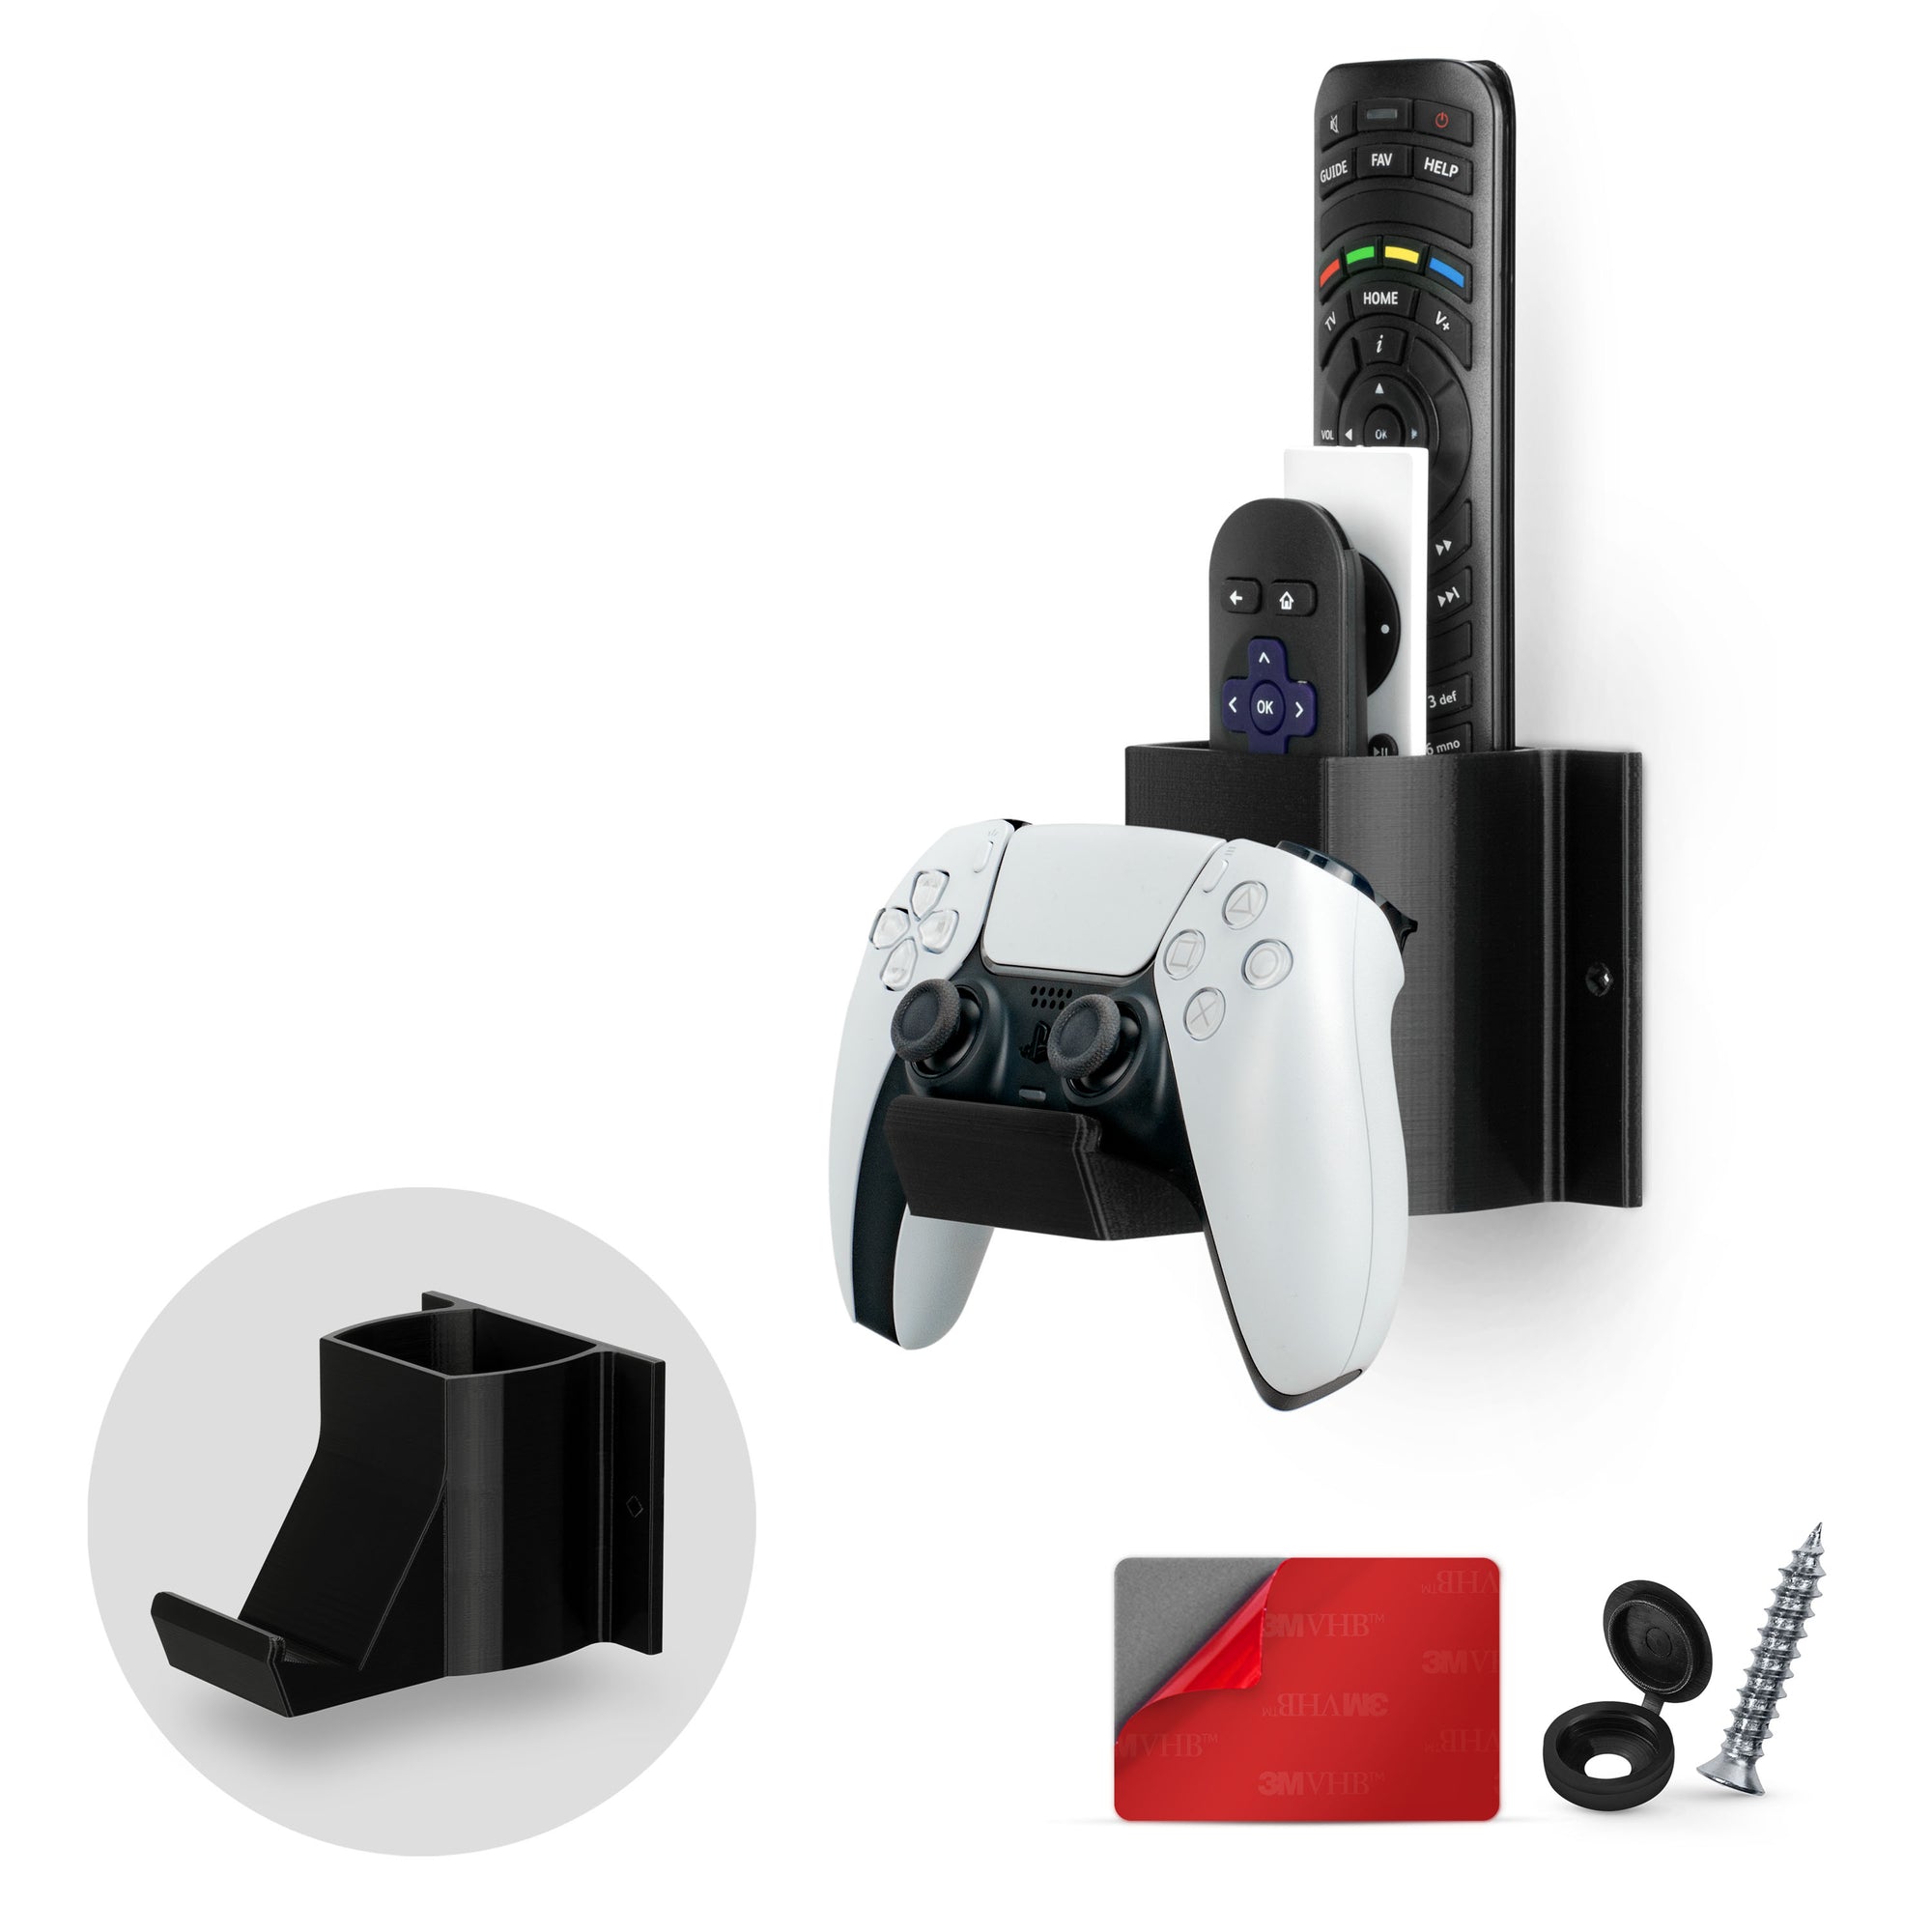 The Elephant - Game Controller & TV Remote Control Wall Mount Holder, Adhesive & Screw In, Universal Design for Xbox ONE PS5 PS4 PC Gamepads